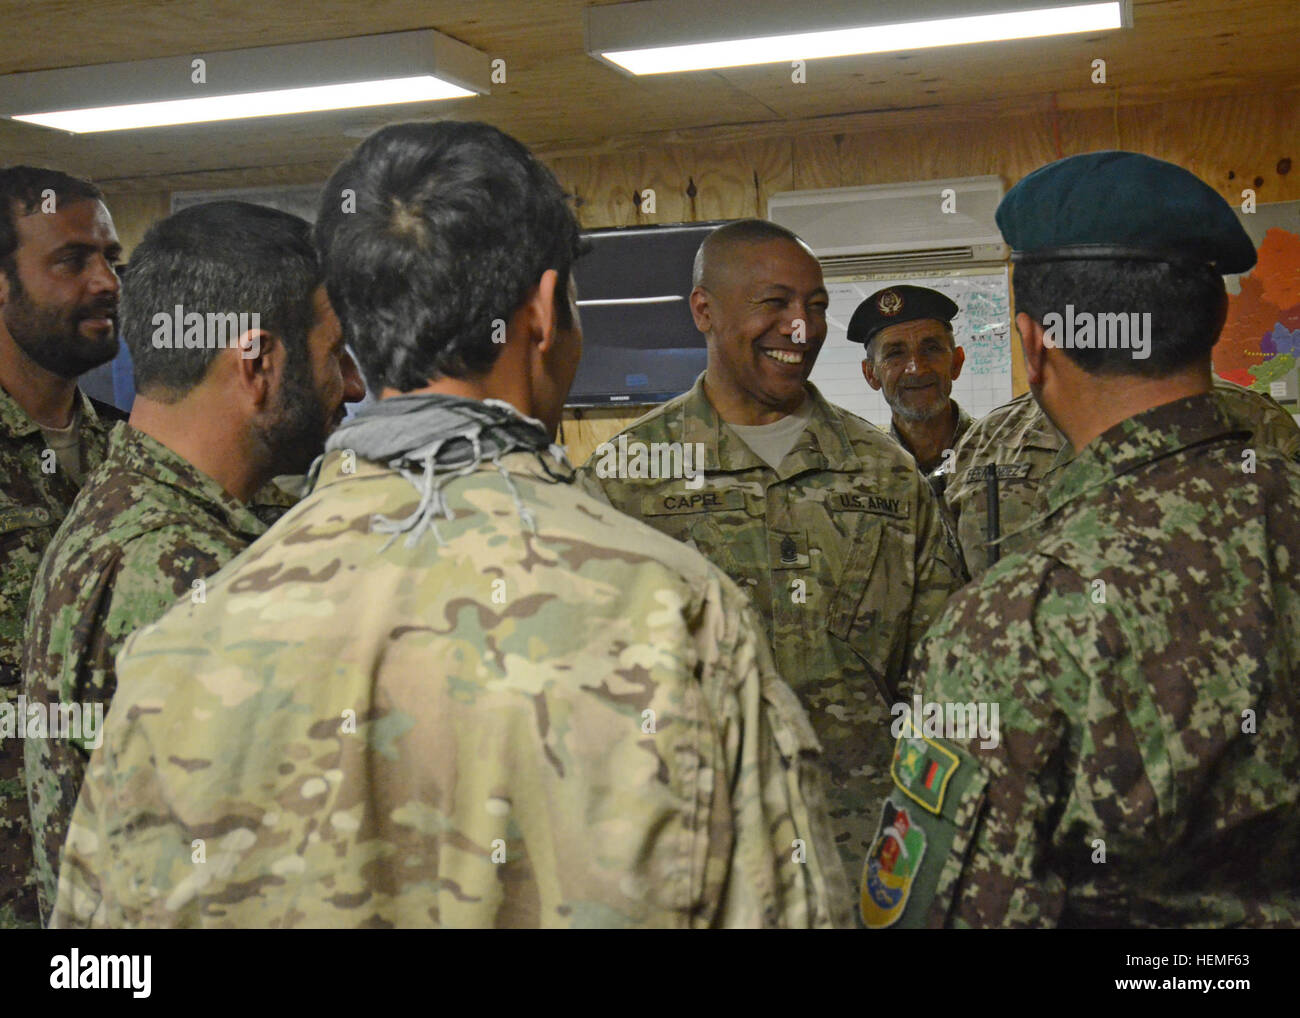 U.S. Army Command Sgt. Maj. Thomas R. Capel, center, International Security Assistance Force and United States Forces-Afghanistan, senior enlisted leader, shares a light moment with Afghan National Army soldiers assigned to 2nd Brigade, 201st Corps, at Forward Operating Base Joyce. During the battlefield circulation, Capel conducted a question and answer session with soldiers, met with senior leadership and toured the Afghan National Army side of the base. (U.S. Army photo by Staff Sgt. Richard Andrade, Task Force Long Knife Public Affairs) ISAF senior enlisted leader visits FOB Joyce 130302-A Stock Photo